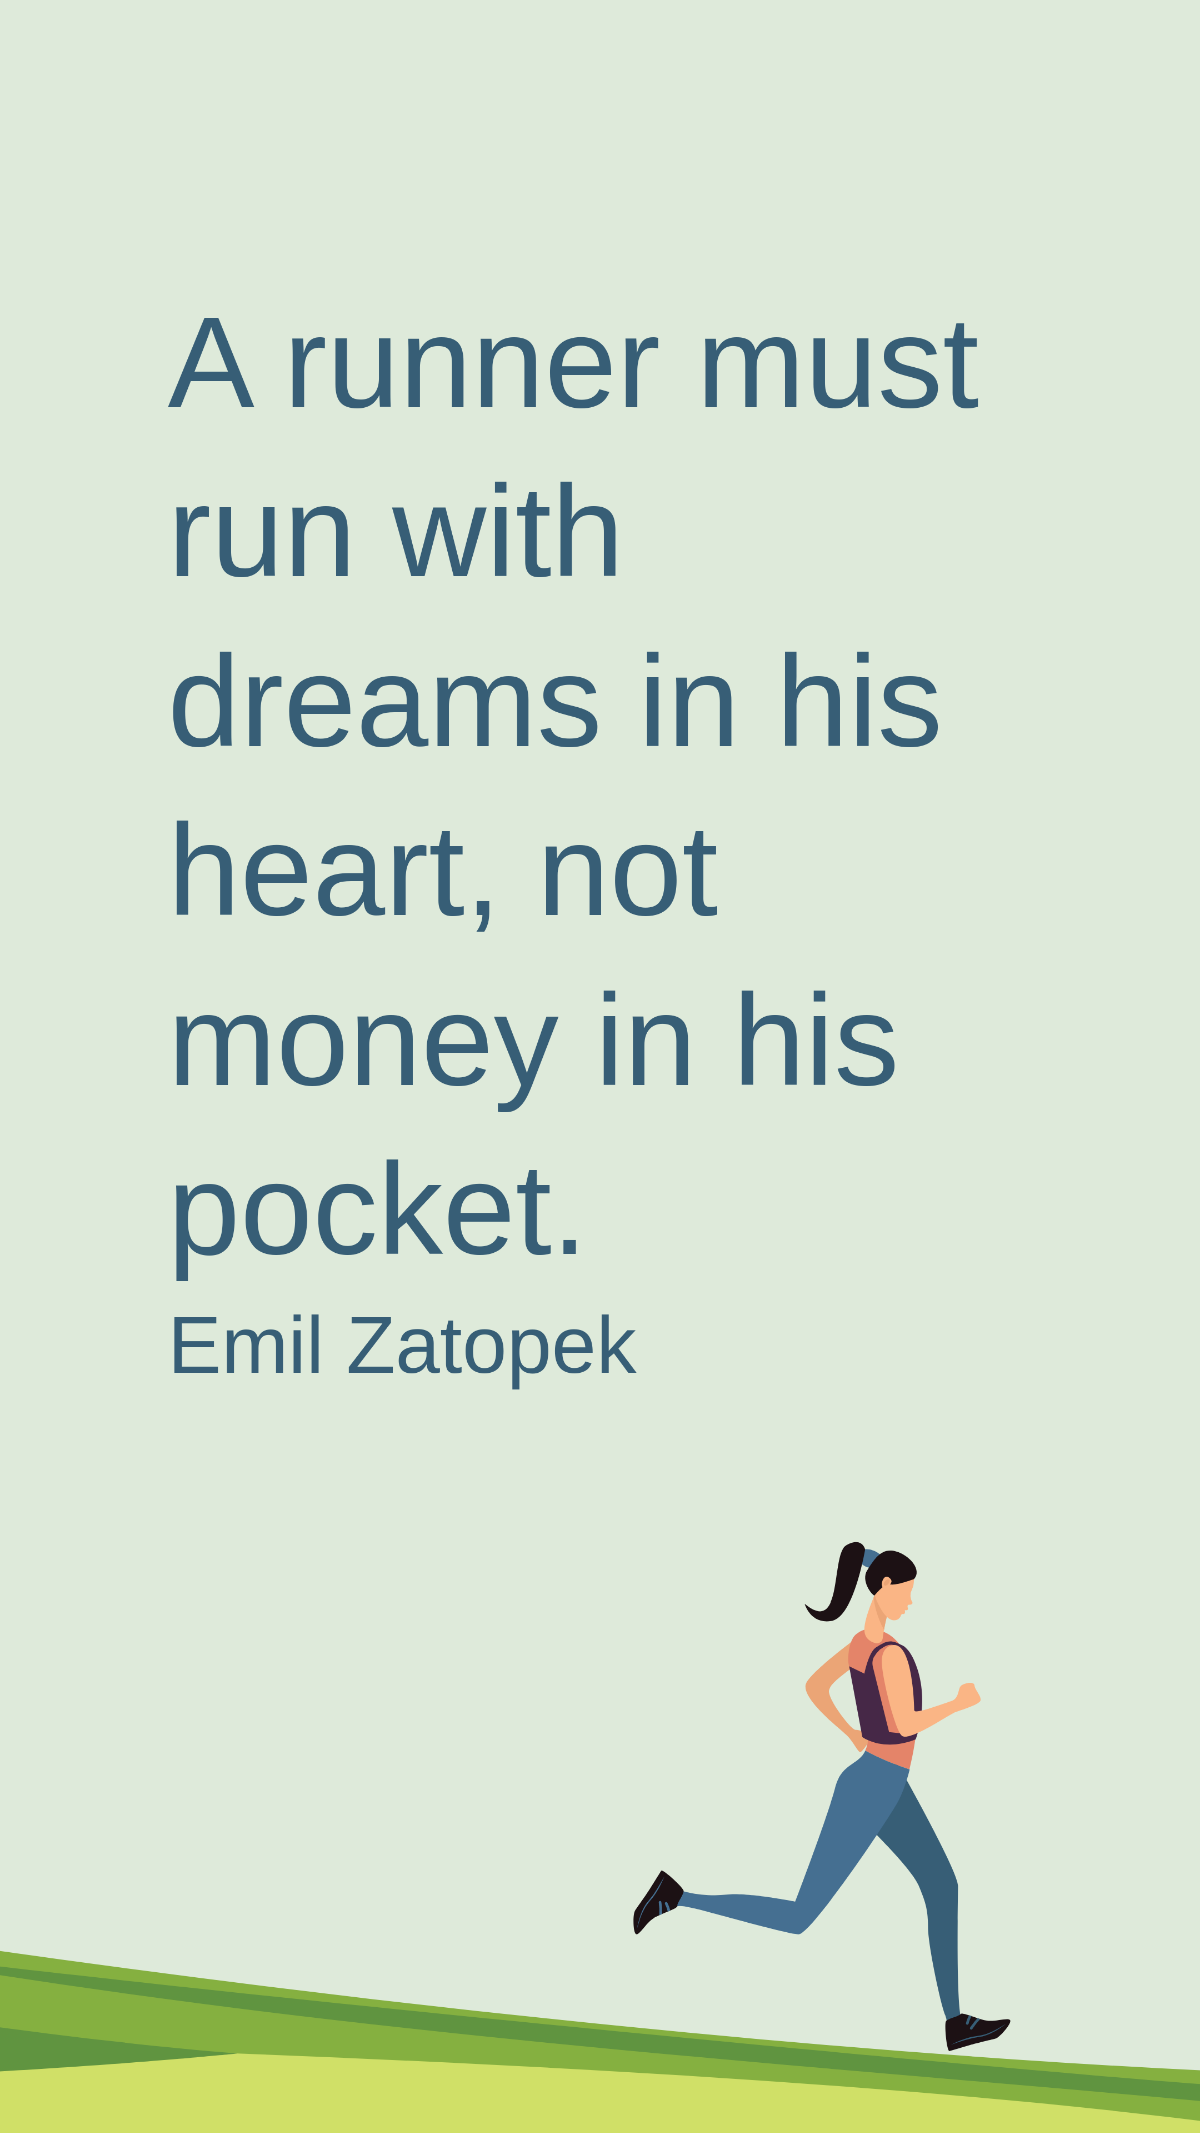 Emil Zatopek - A runner must run with dreams in his heart, not money in his pocket. Template